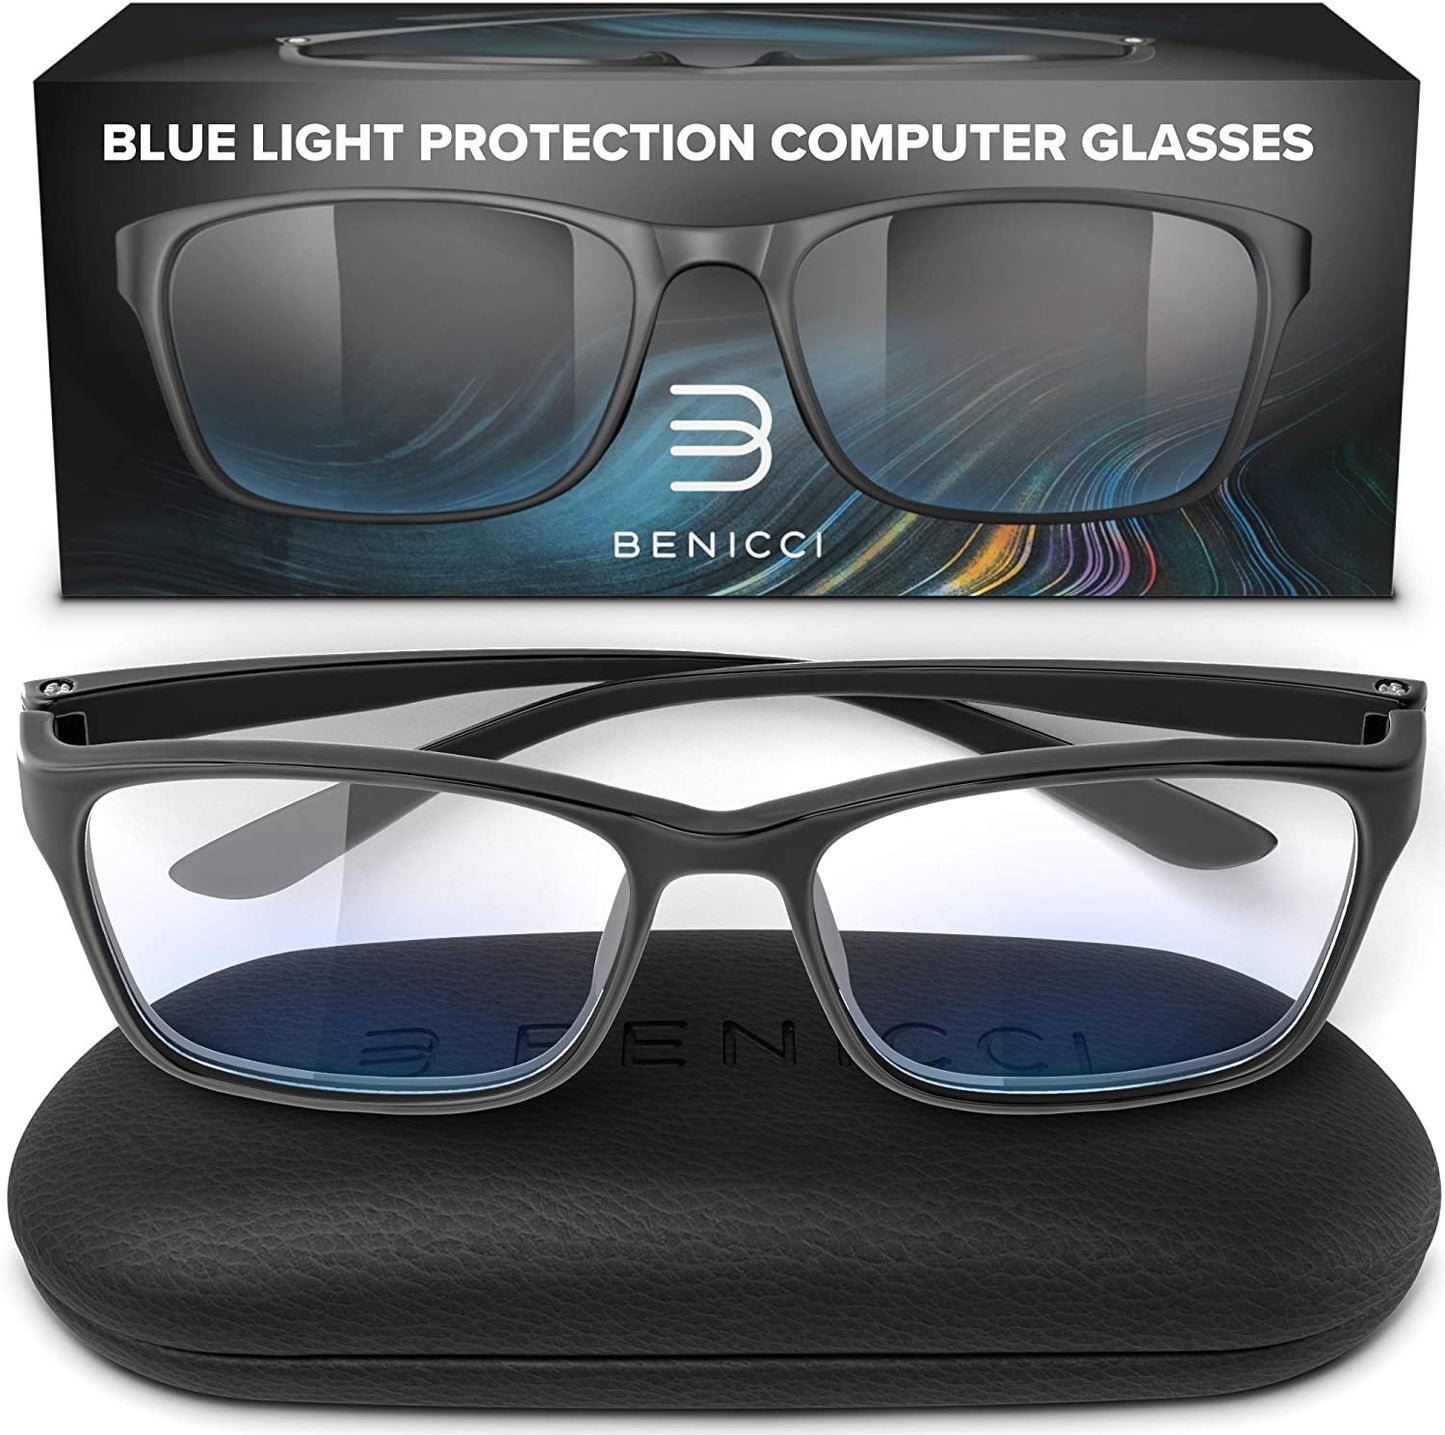 Why you need blue light glasses for the digital world – Specsmakers  Opticians PVT. LTD.